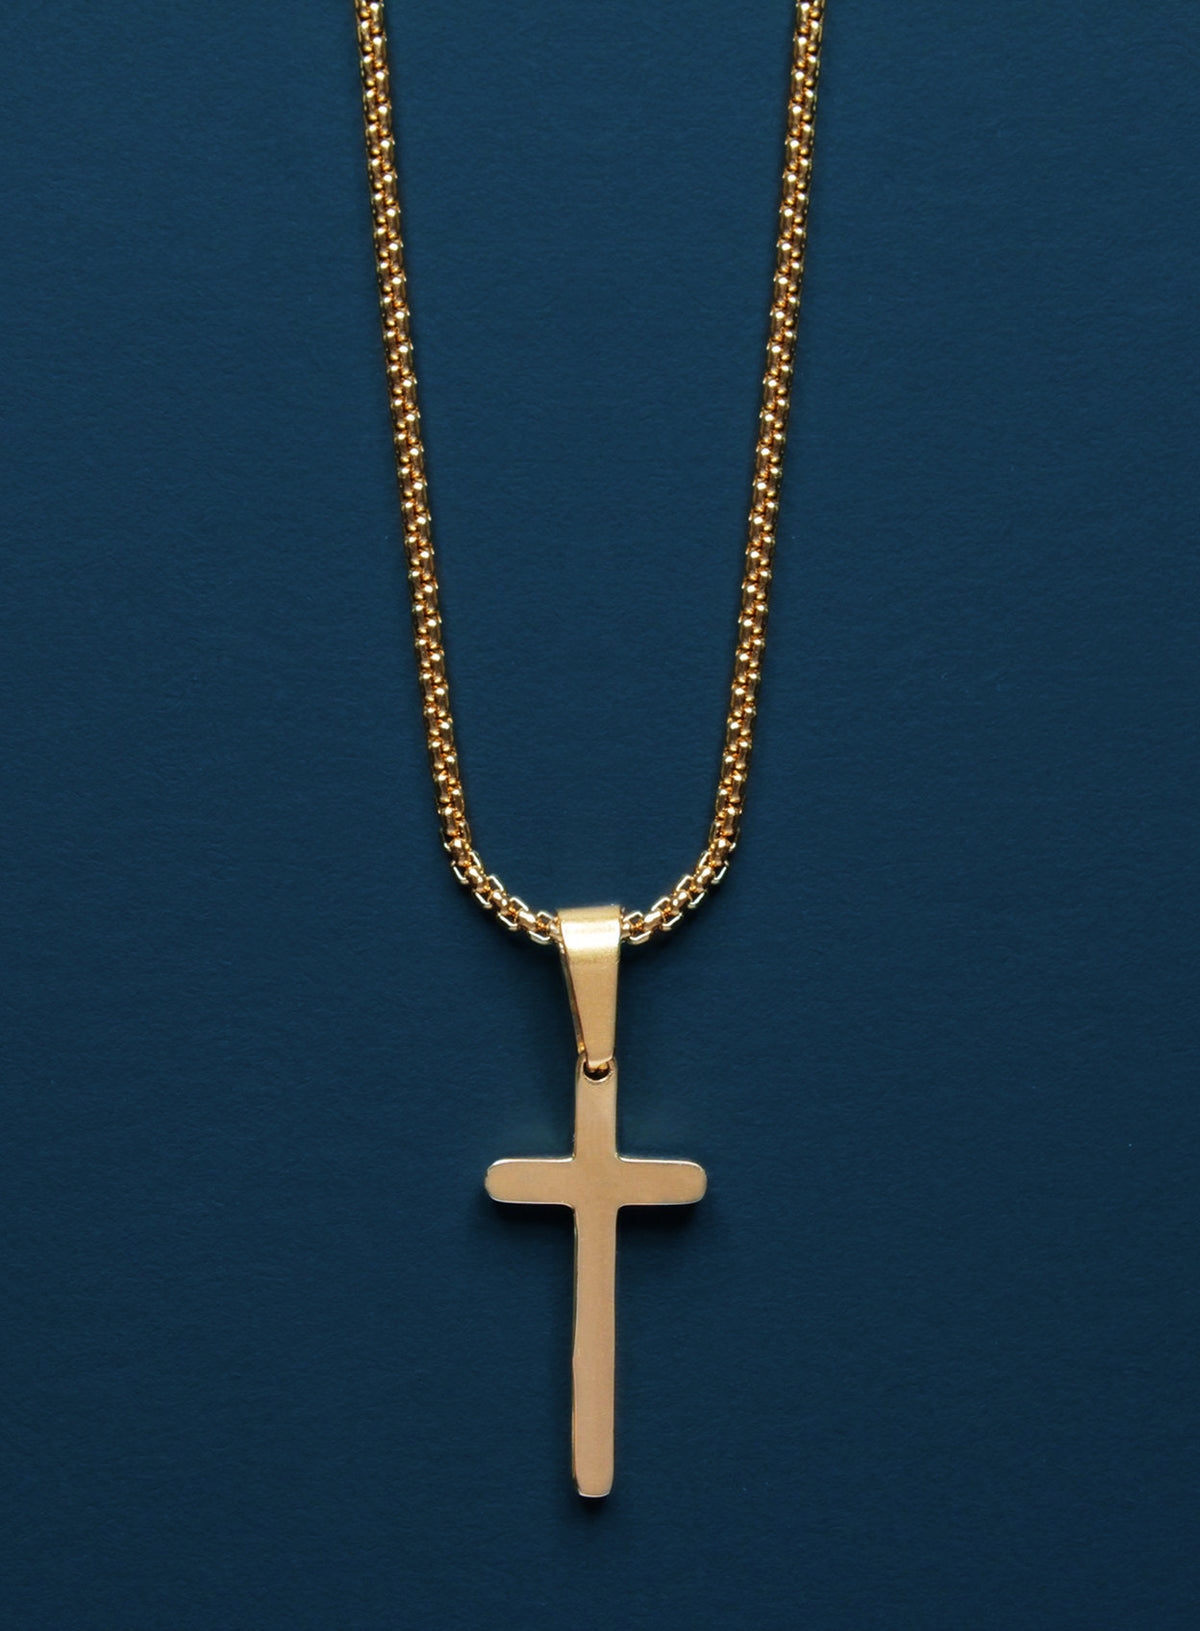 MINI GOLD CROSS NECKLACE FOR — SMITH ARE MEN WE ALL